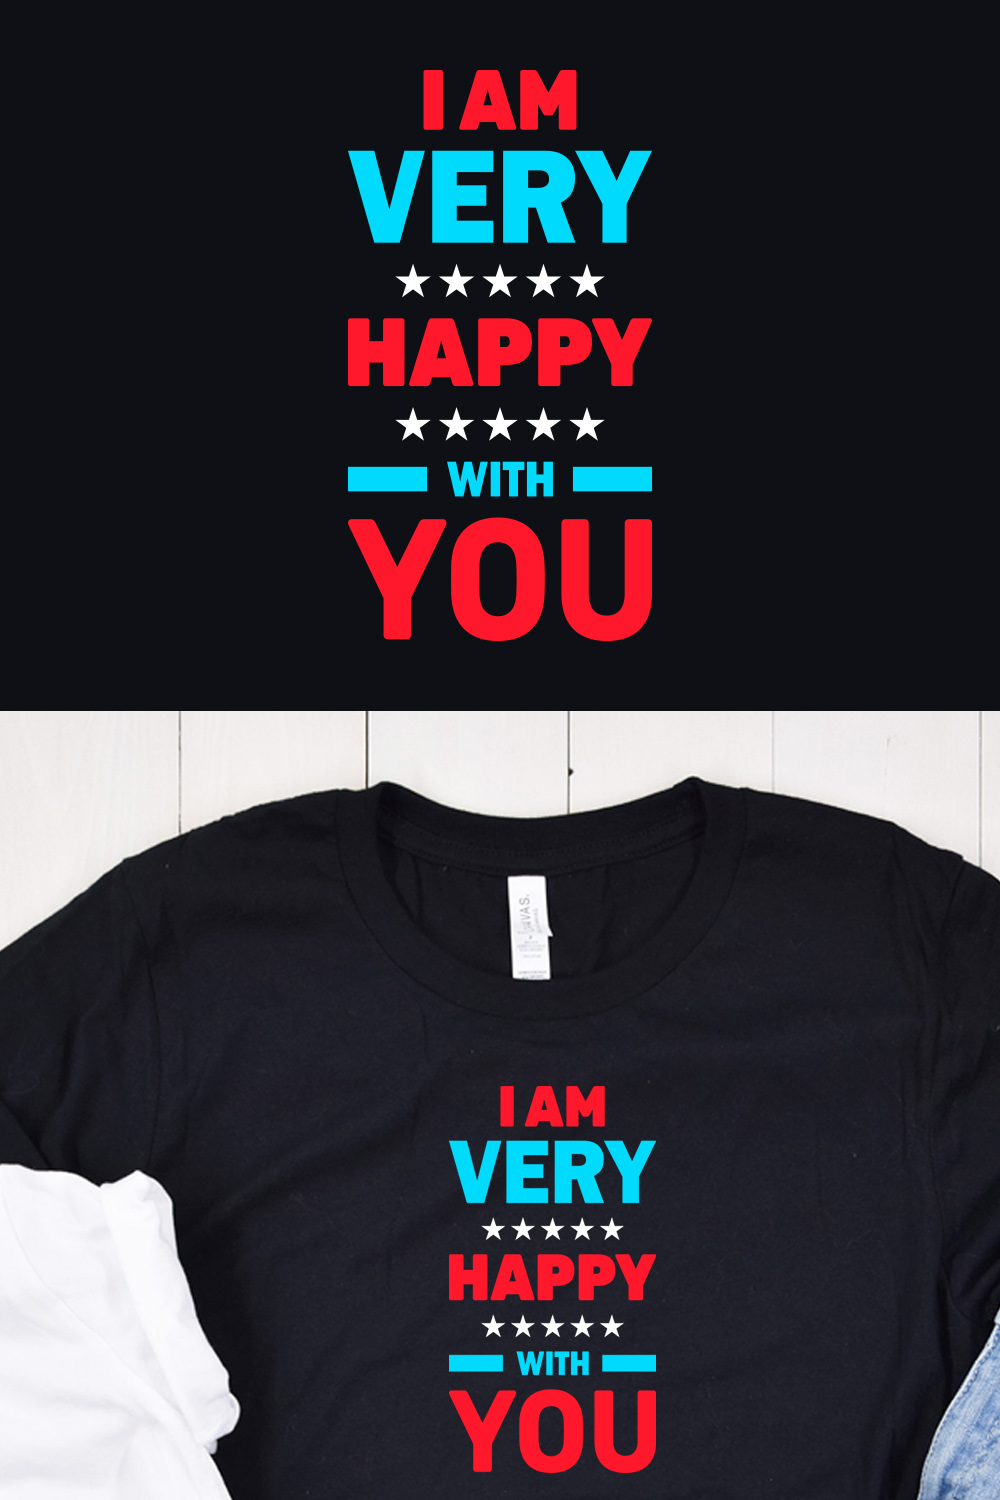 I am Very Happy with You Typography T-Shirt Design Pinterest collage image.